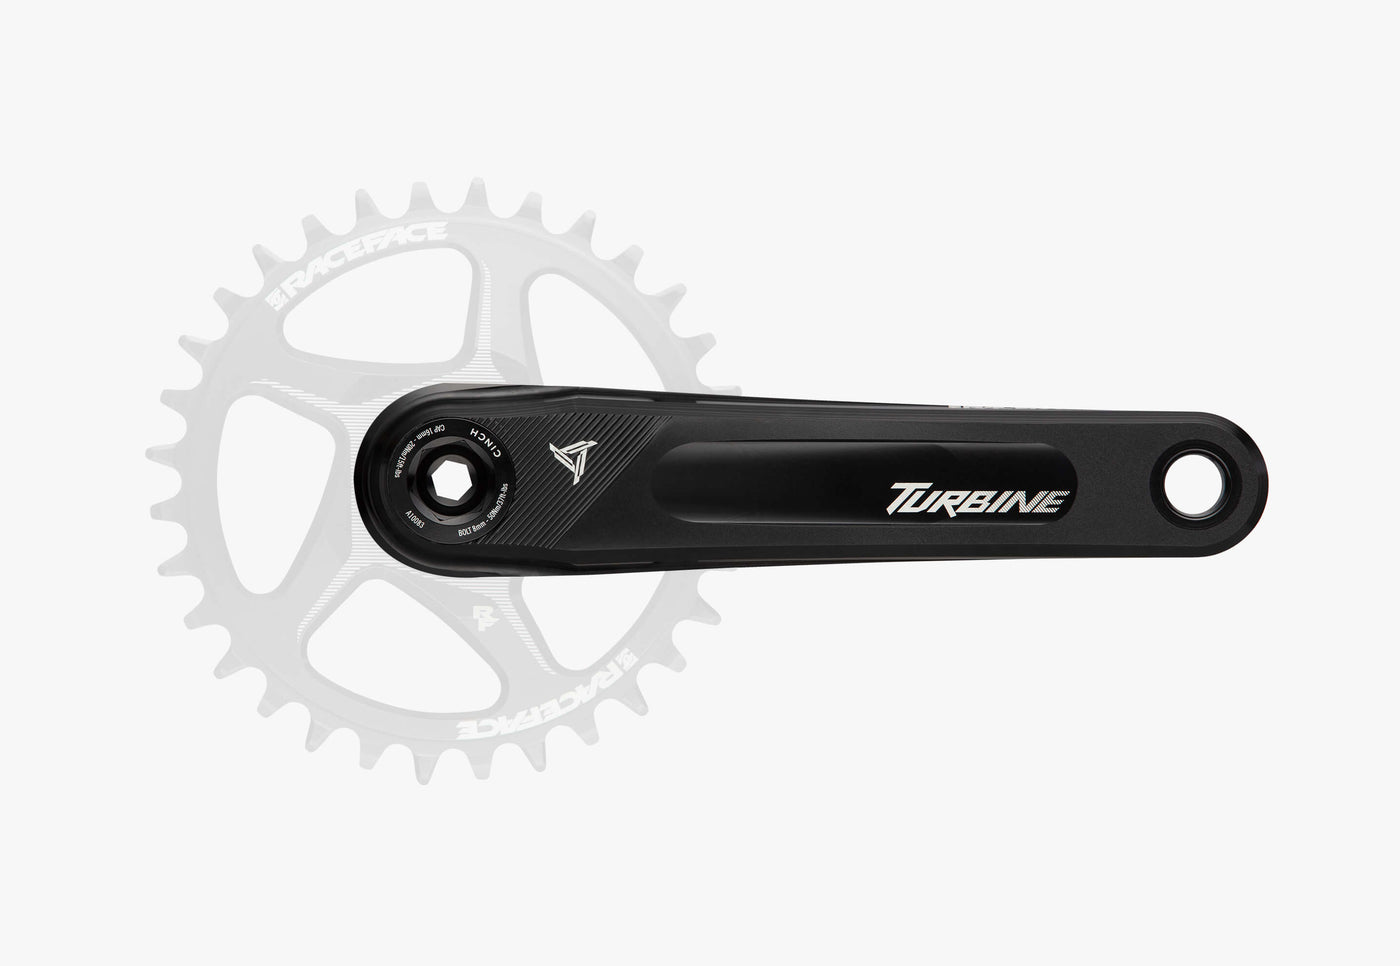 The Turbine continues setting the benchmark for performance aluminum cranks and cements the Turbine legacy. Featuring the new Cinch System interface, the Turbine is an incredibly light & stiff performance crank-set for today's modern XC and trail rider. Imagine interchangeable spiders, limitless ring combinations, a 30mm alloy spindle and compatibility across all relevant frame standards. Quite possibly the most versatile crankset you will ever own.